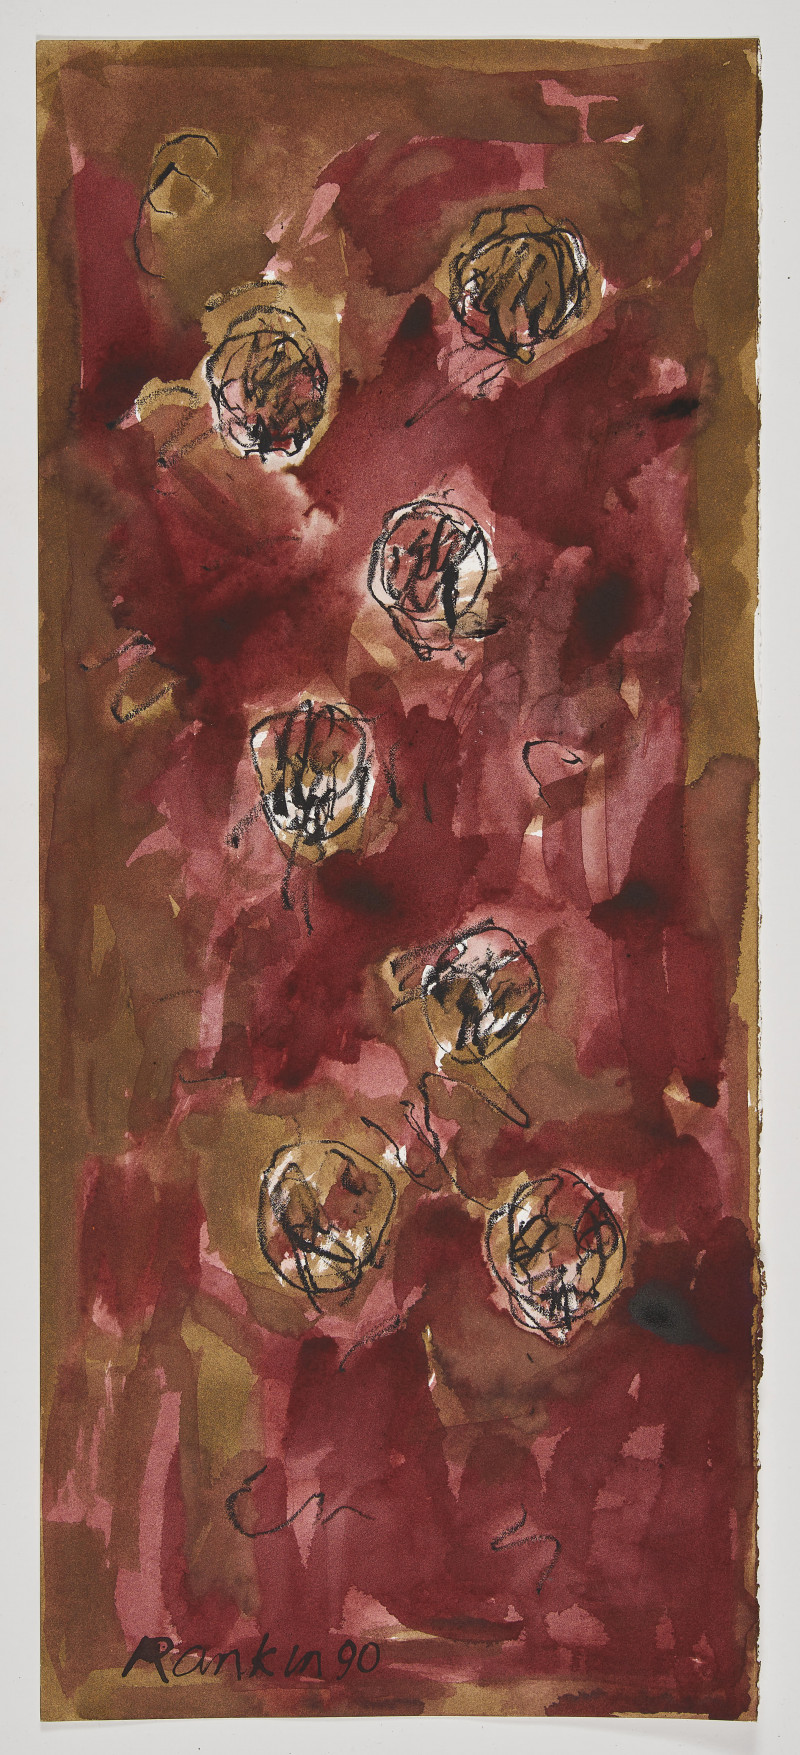 David Rankin - Group, five (5) works on paper